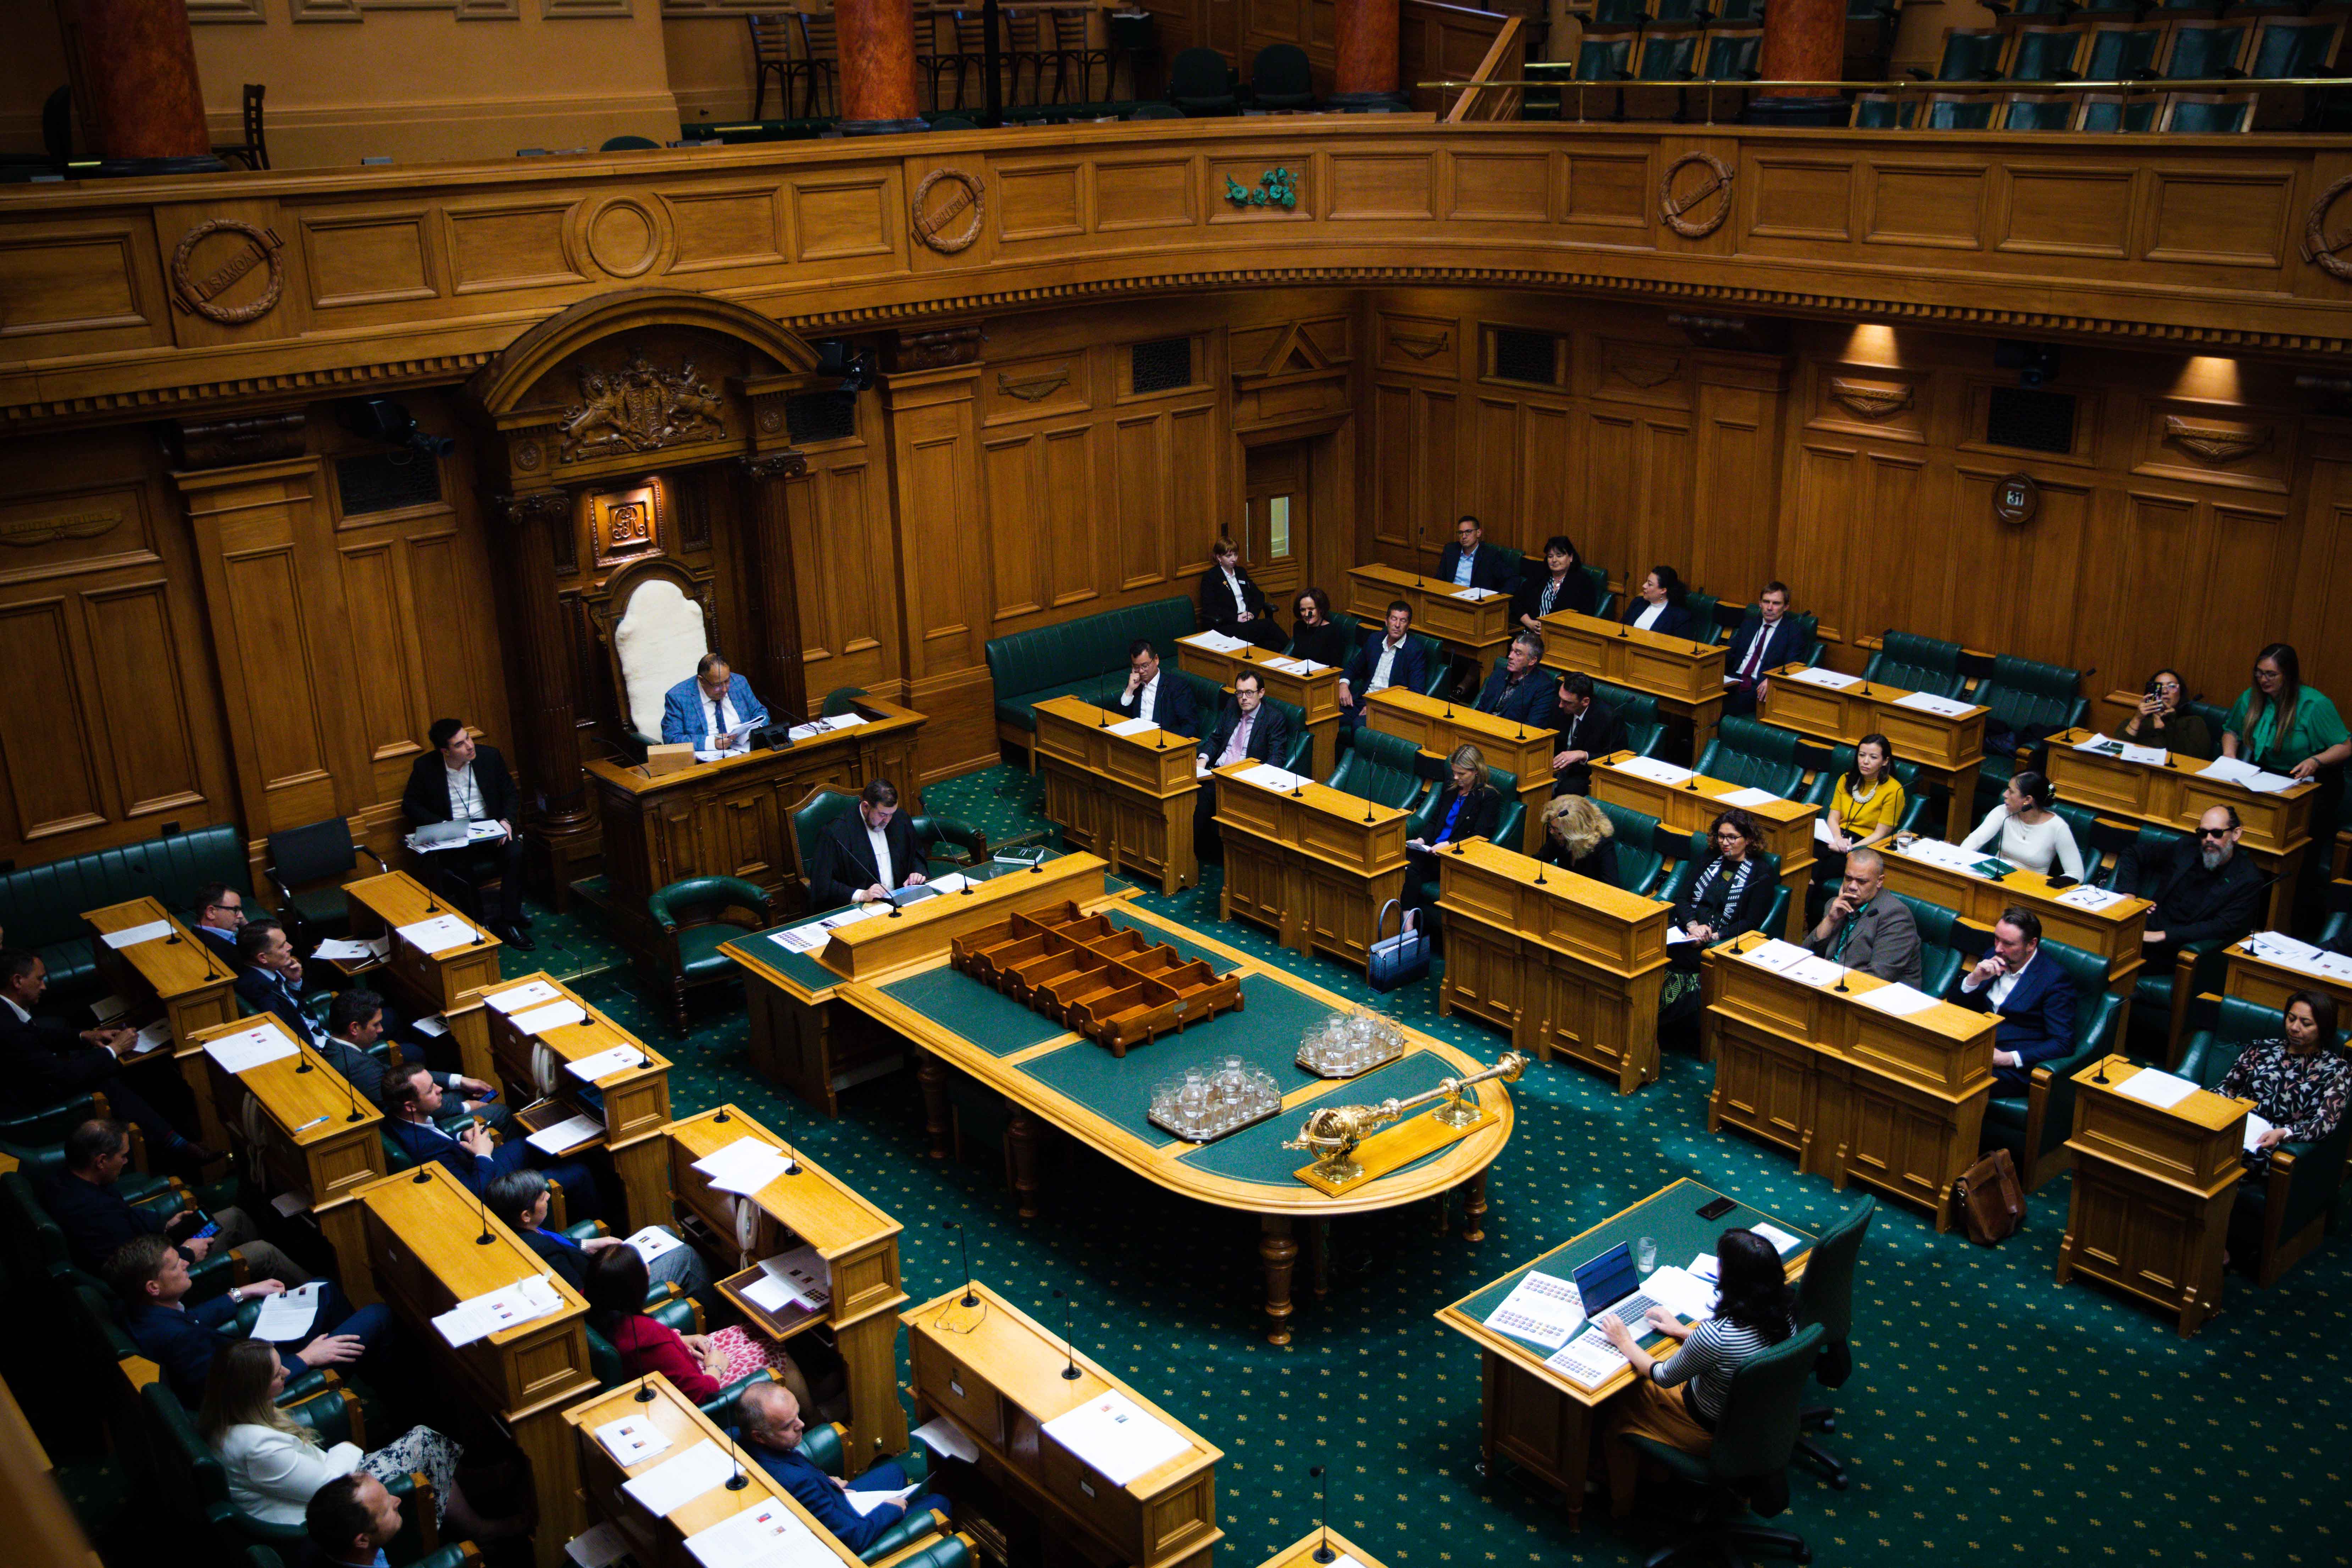 Newly-elected members of the New Zealand Parliament participate in a role playing exercise simulating ministerial question time, chaired by the Rt Hon. Adrian Rurawhe MP, who was then Speaker of the House of Representatives.